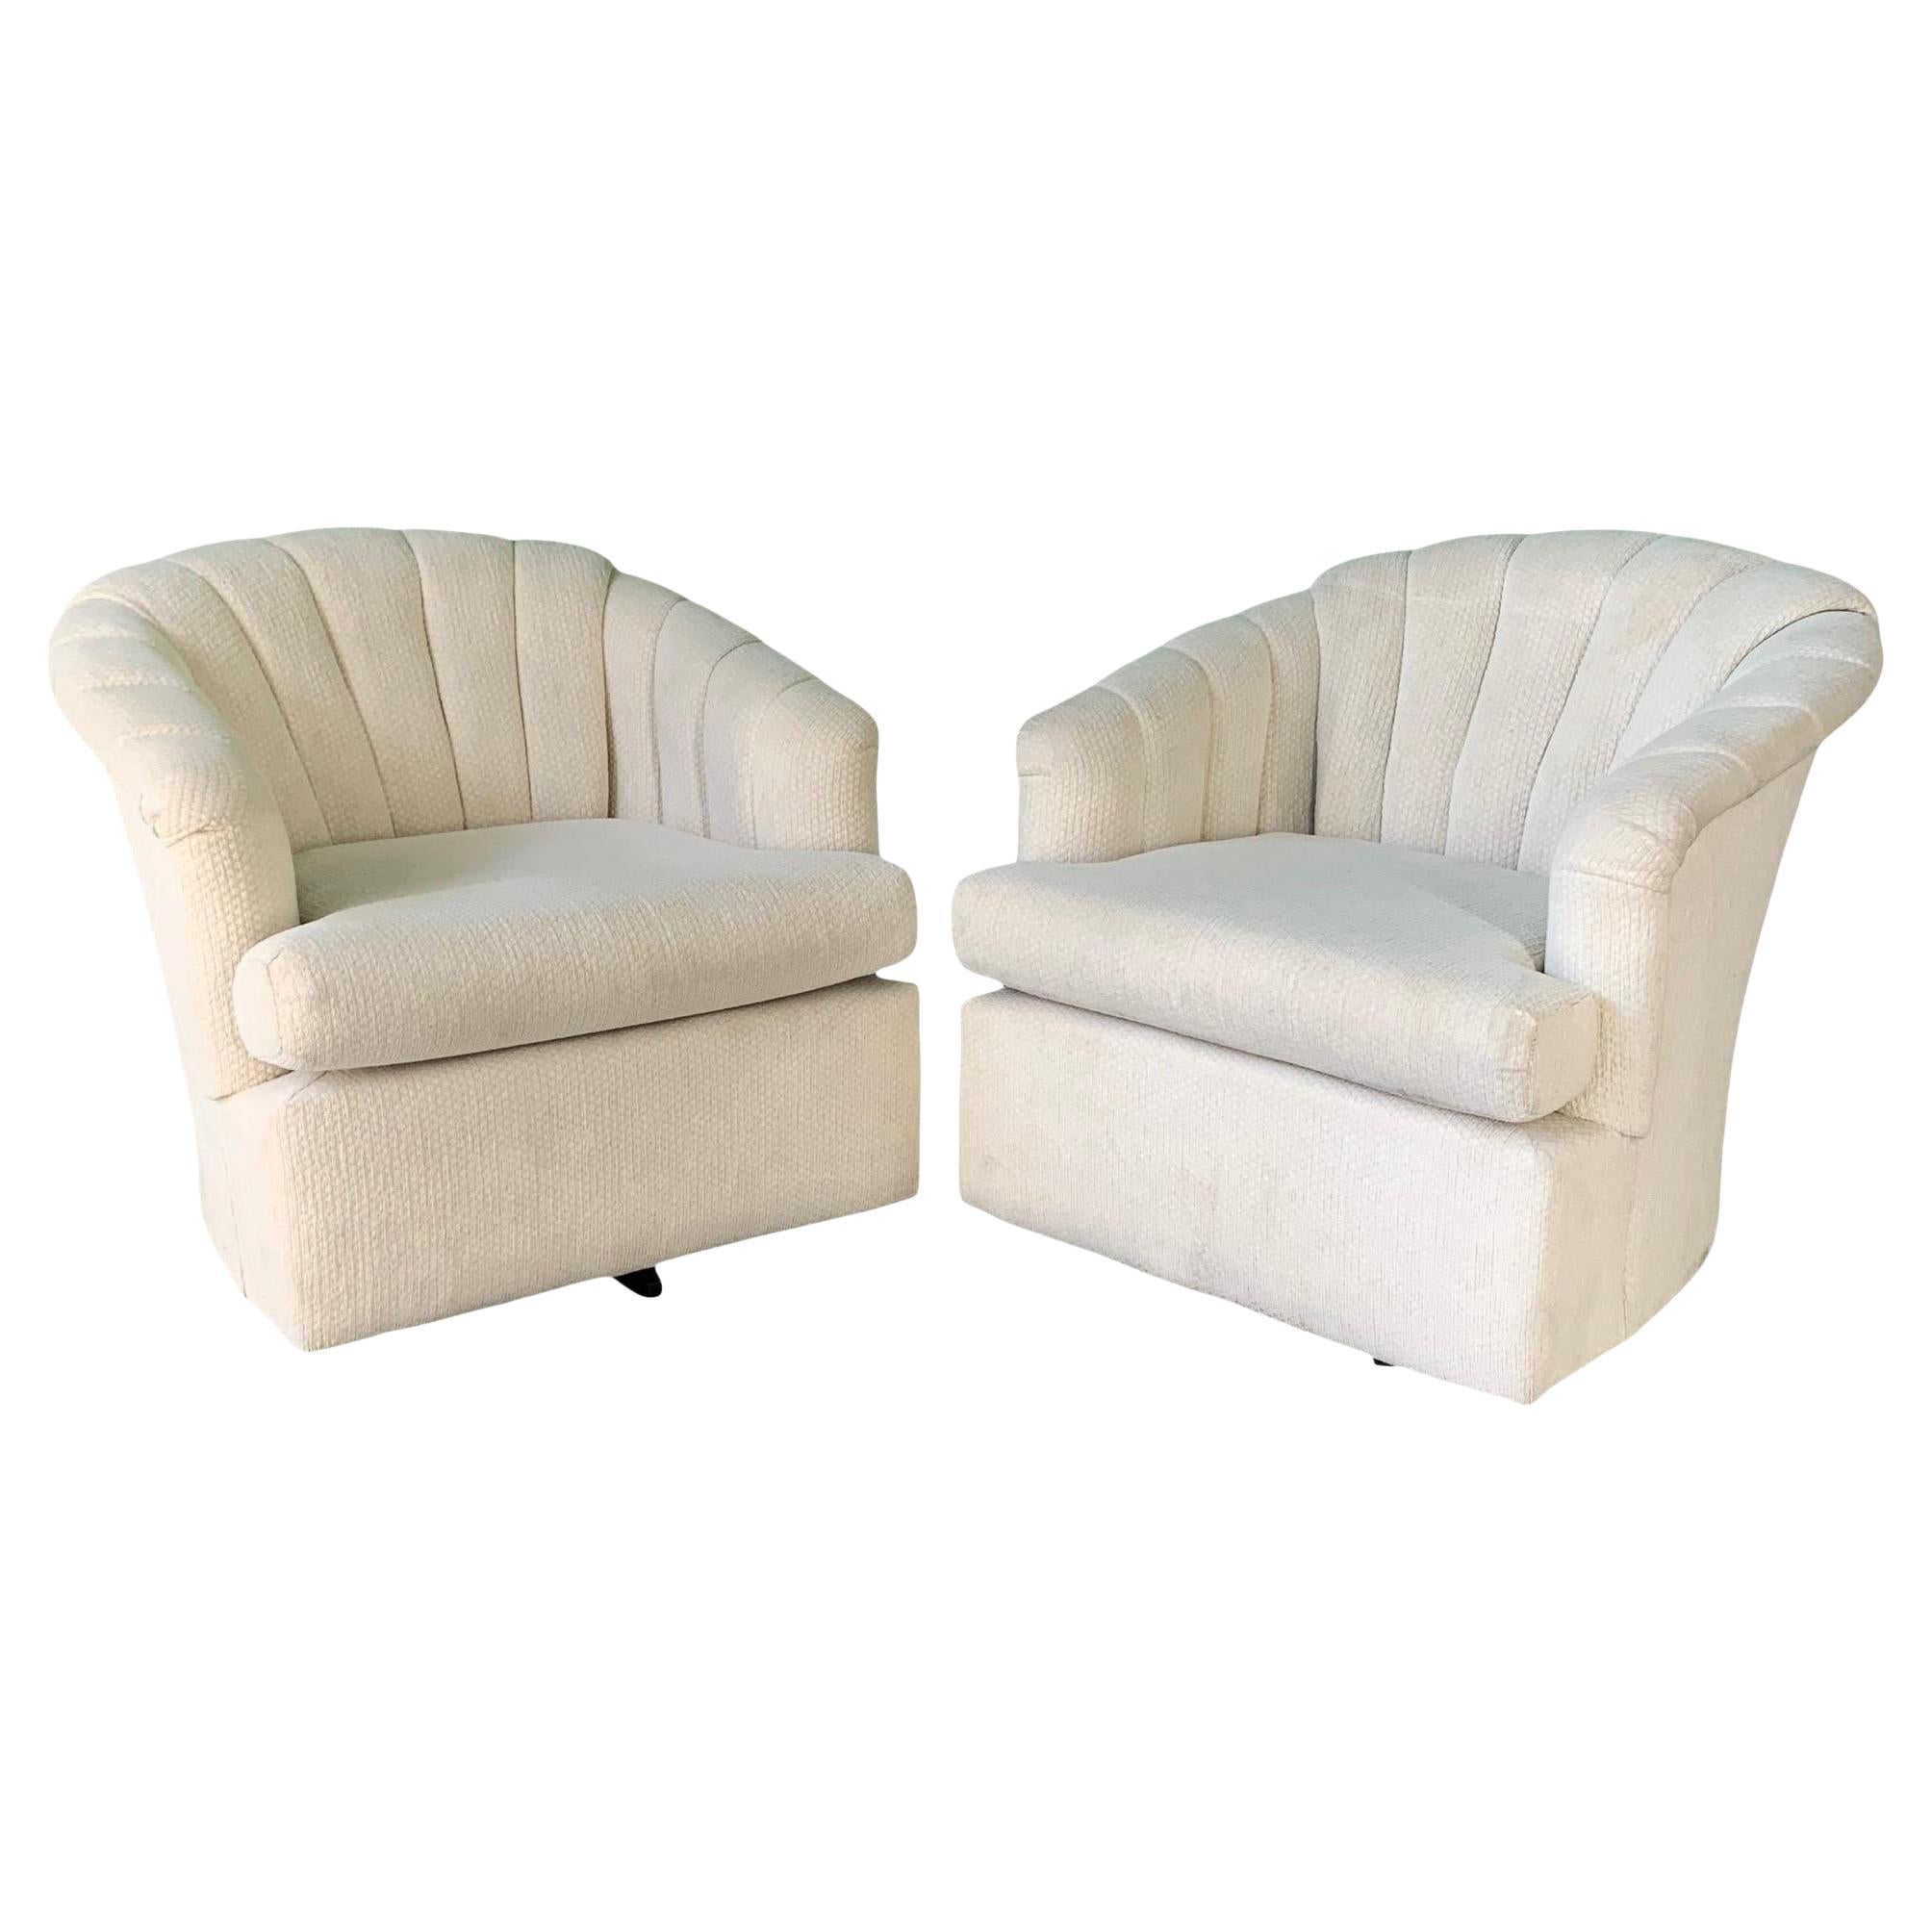 Vintage Channel Back Tufted Swivel Chairs, a Pair